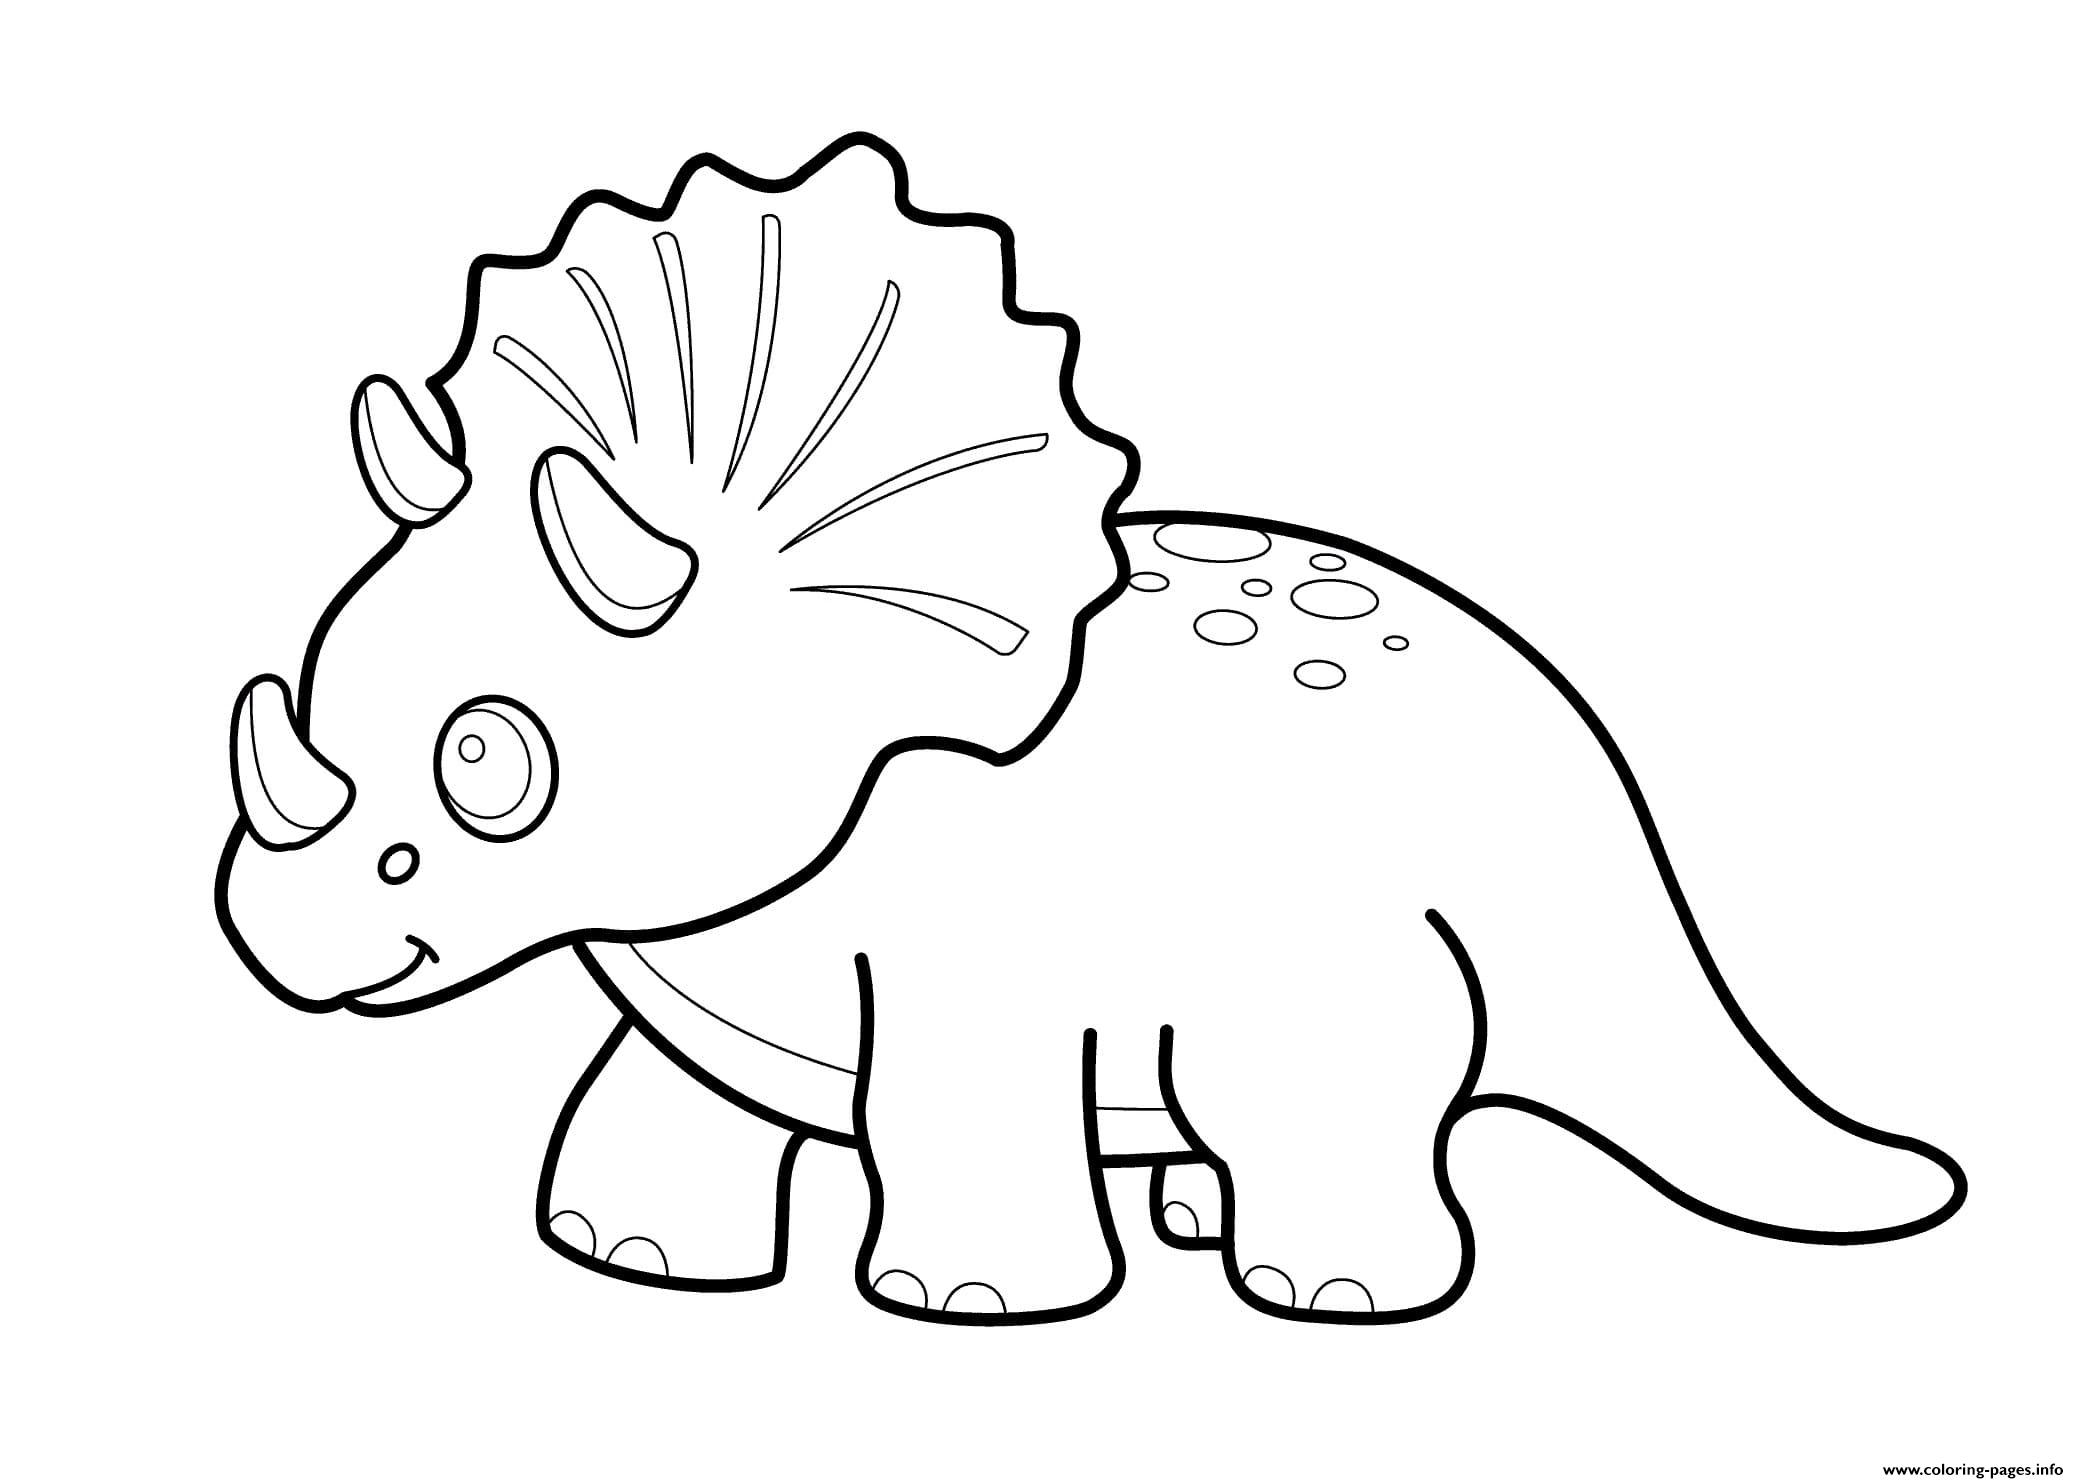 Little Triceratops coloring